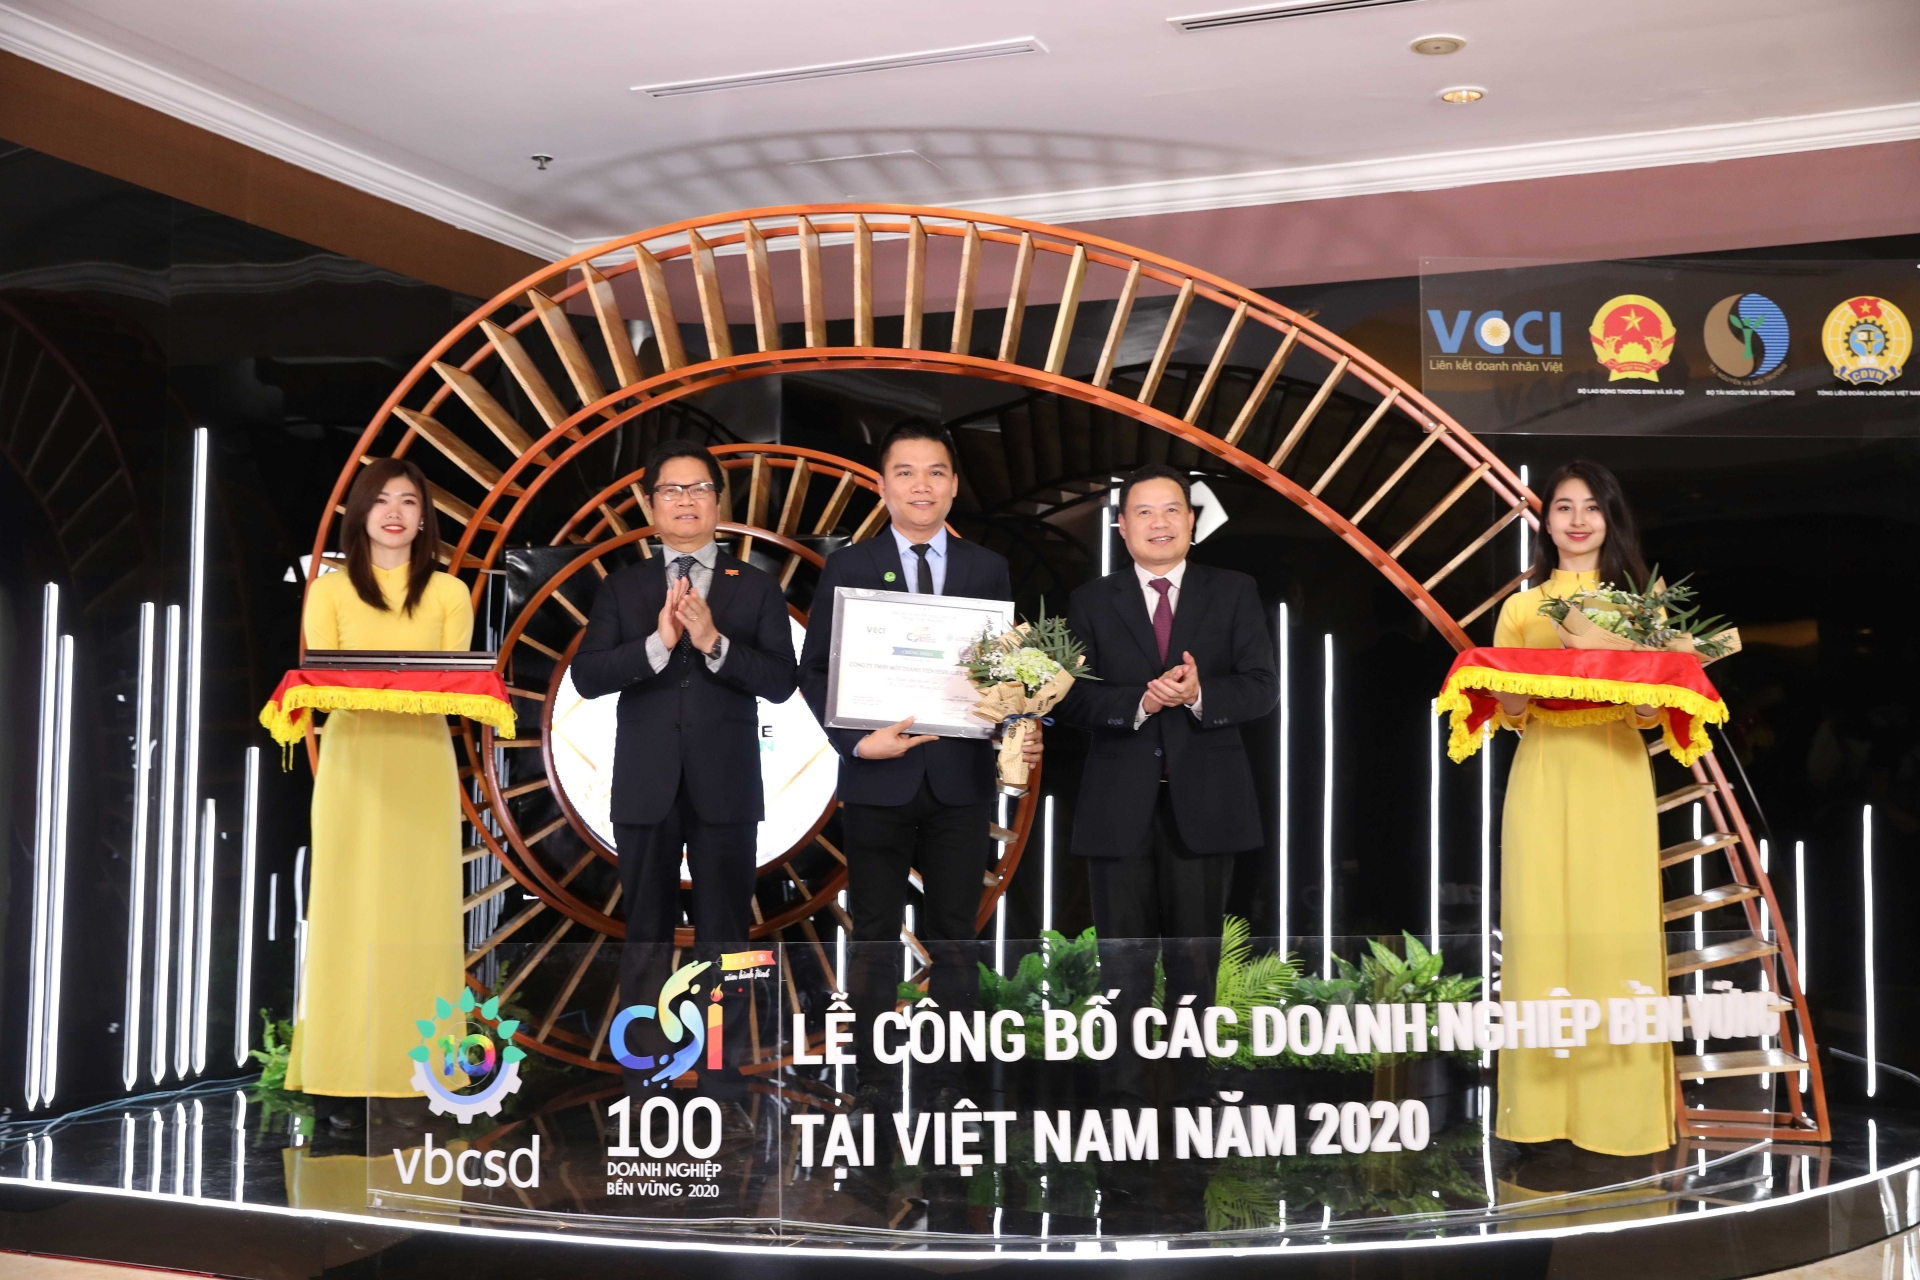 Herbalife Vietnam recognised among most sustainable companies